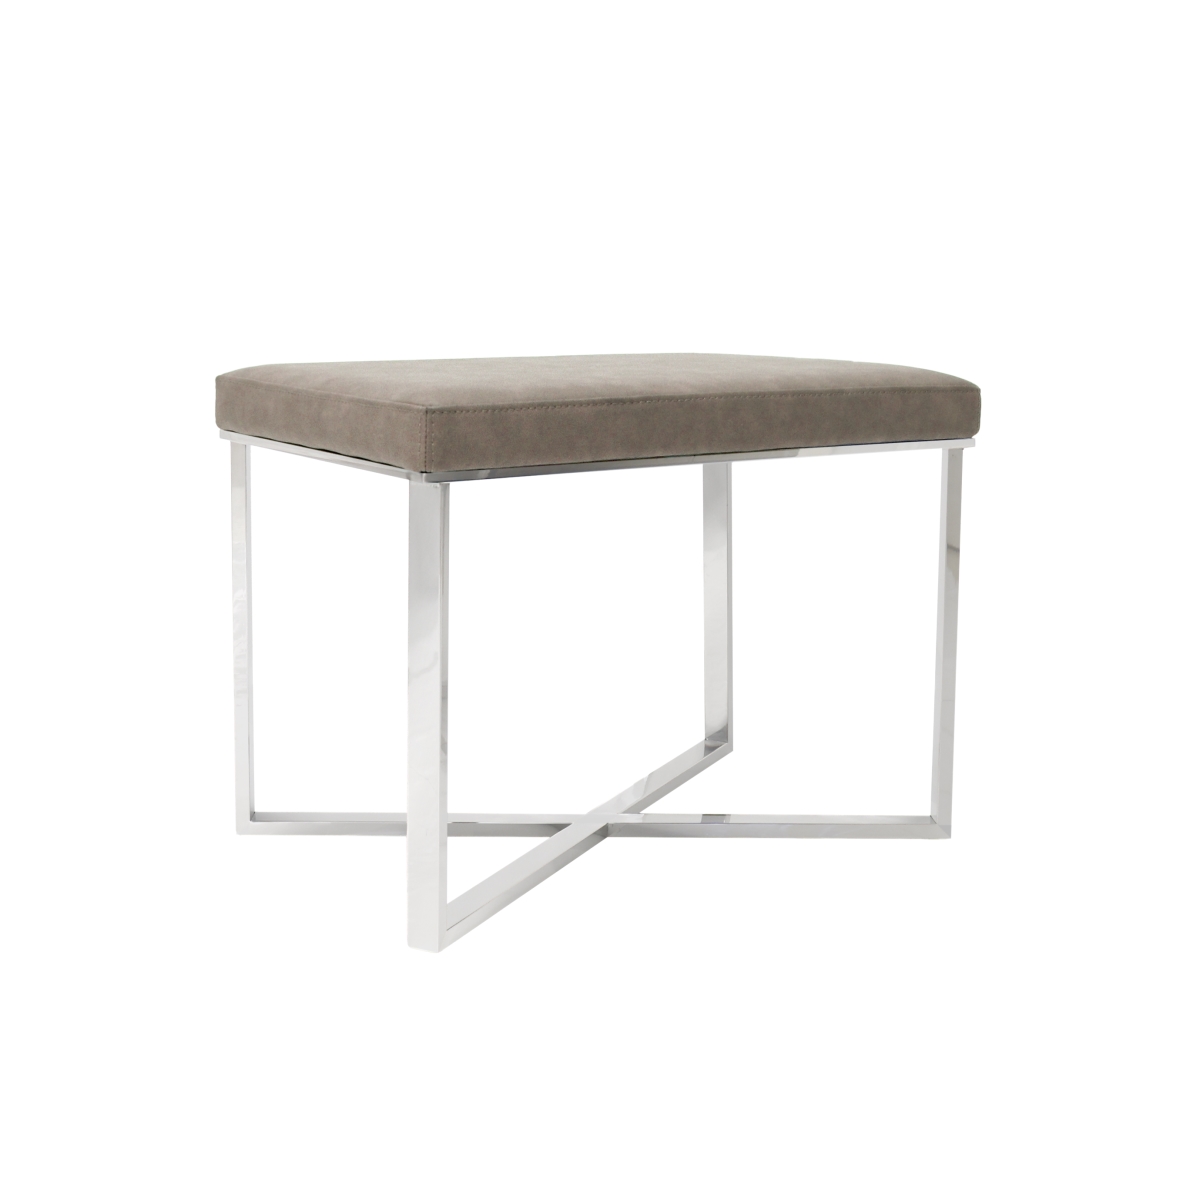 Y-1031c Luxe Collection Stool, Taupe - 24 X 16 X 18 In.